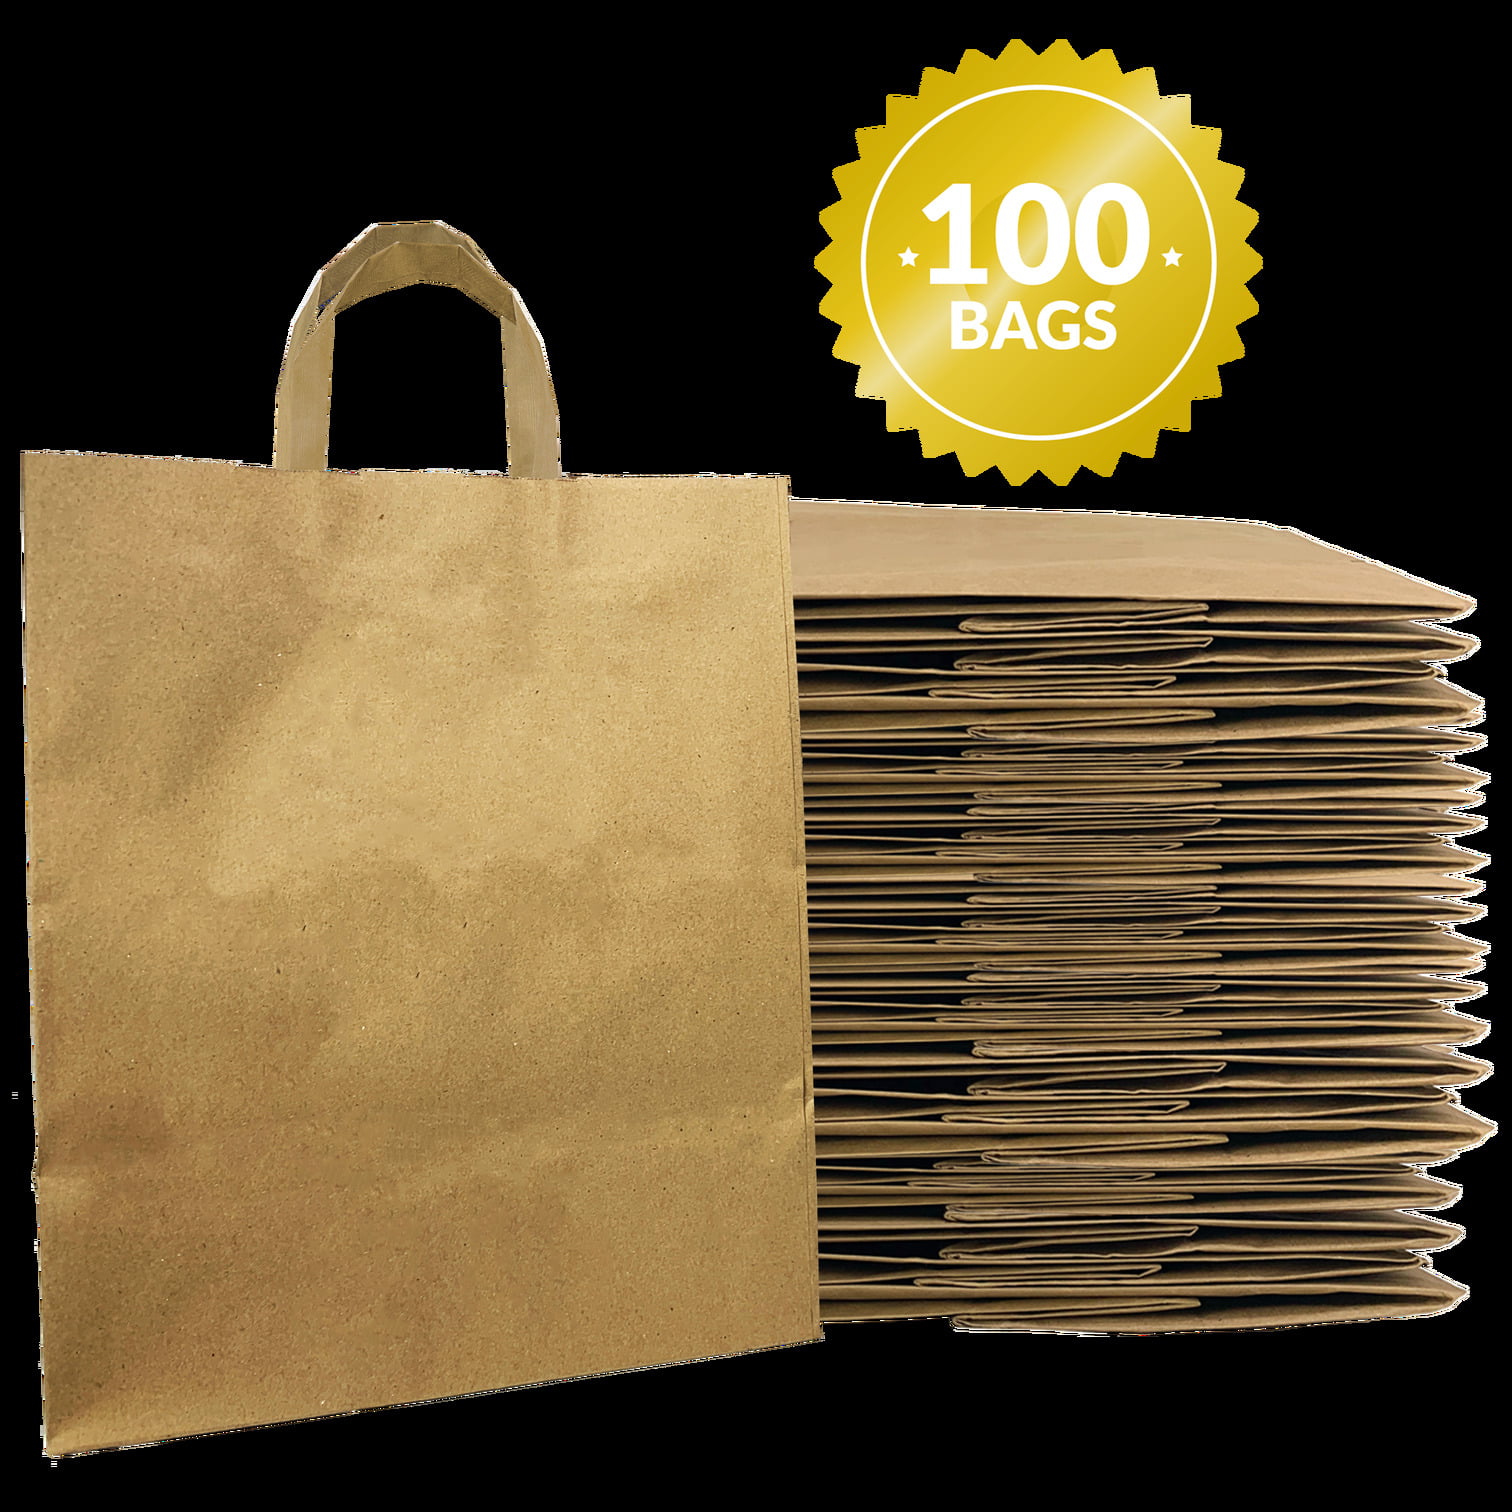 Large 10x6.75x12 100 Pcs Bulk White Paper Bags w//Handles White Paper to Go//Take Out//Restaurant Bags with Handles Retail Bags Reli Shopping Bags Gift Bags; 25/% Larger Than 10x5x13